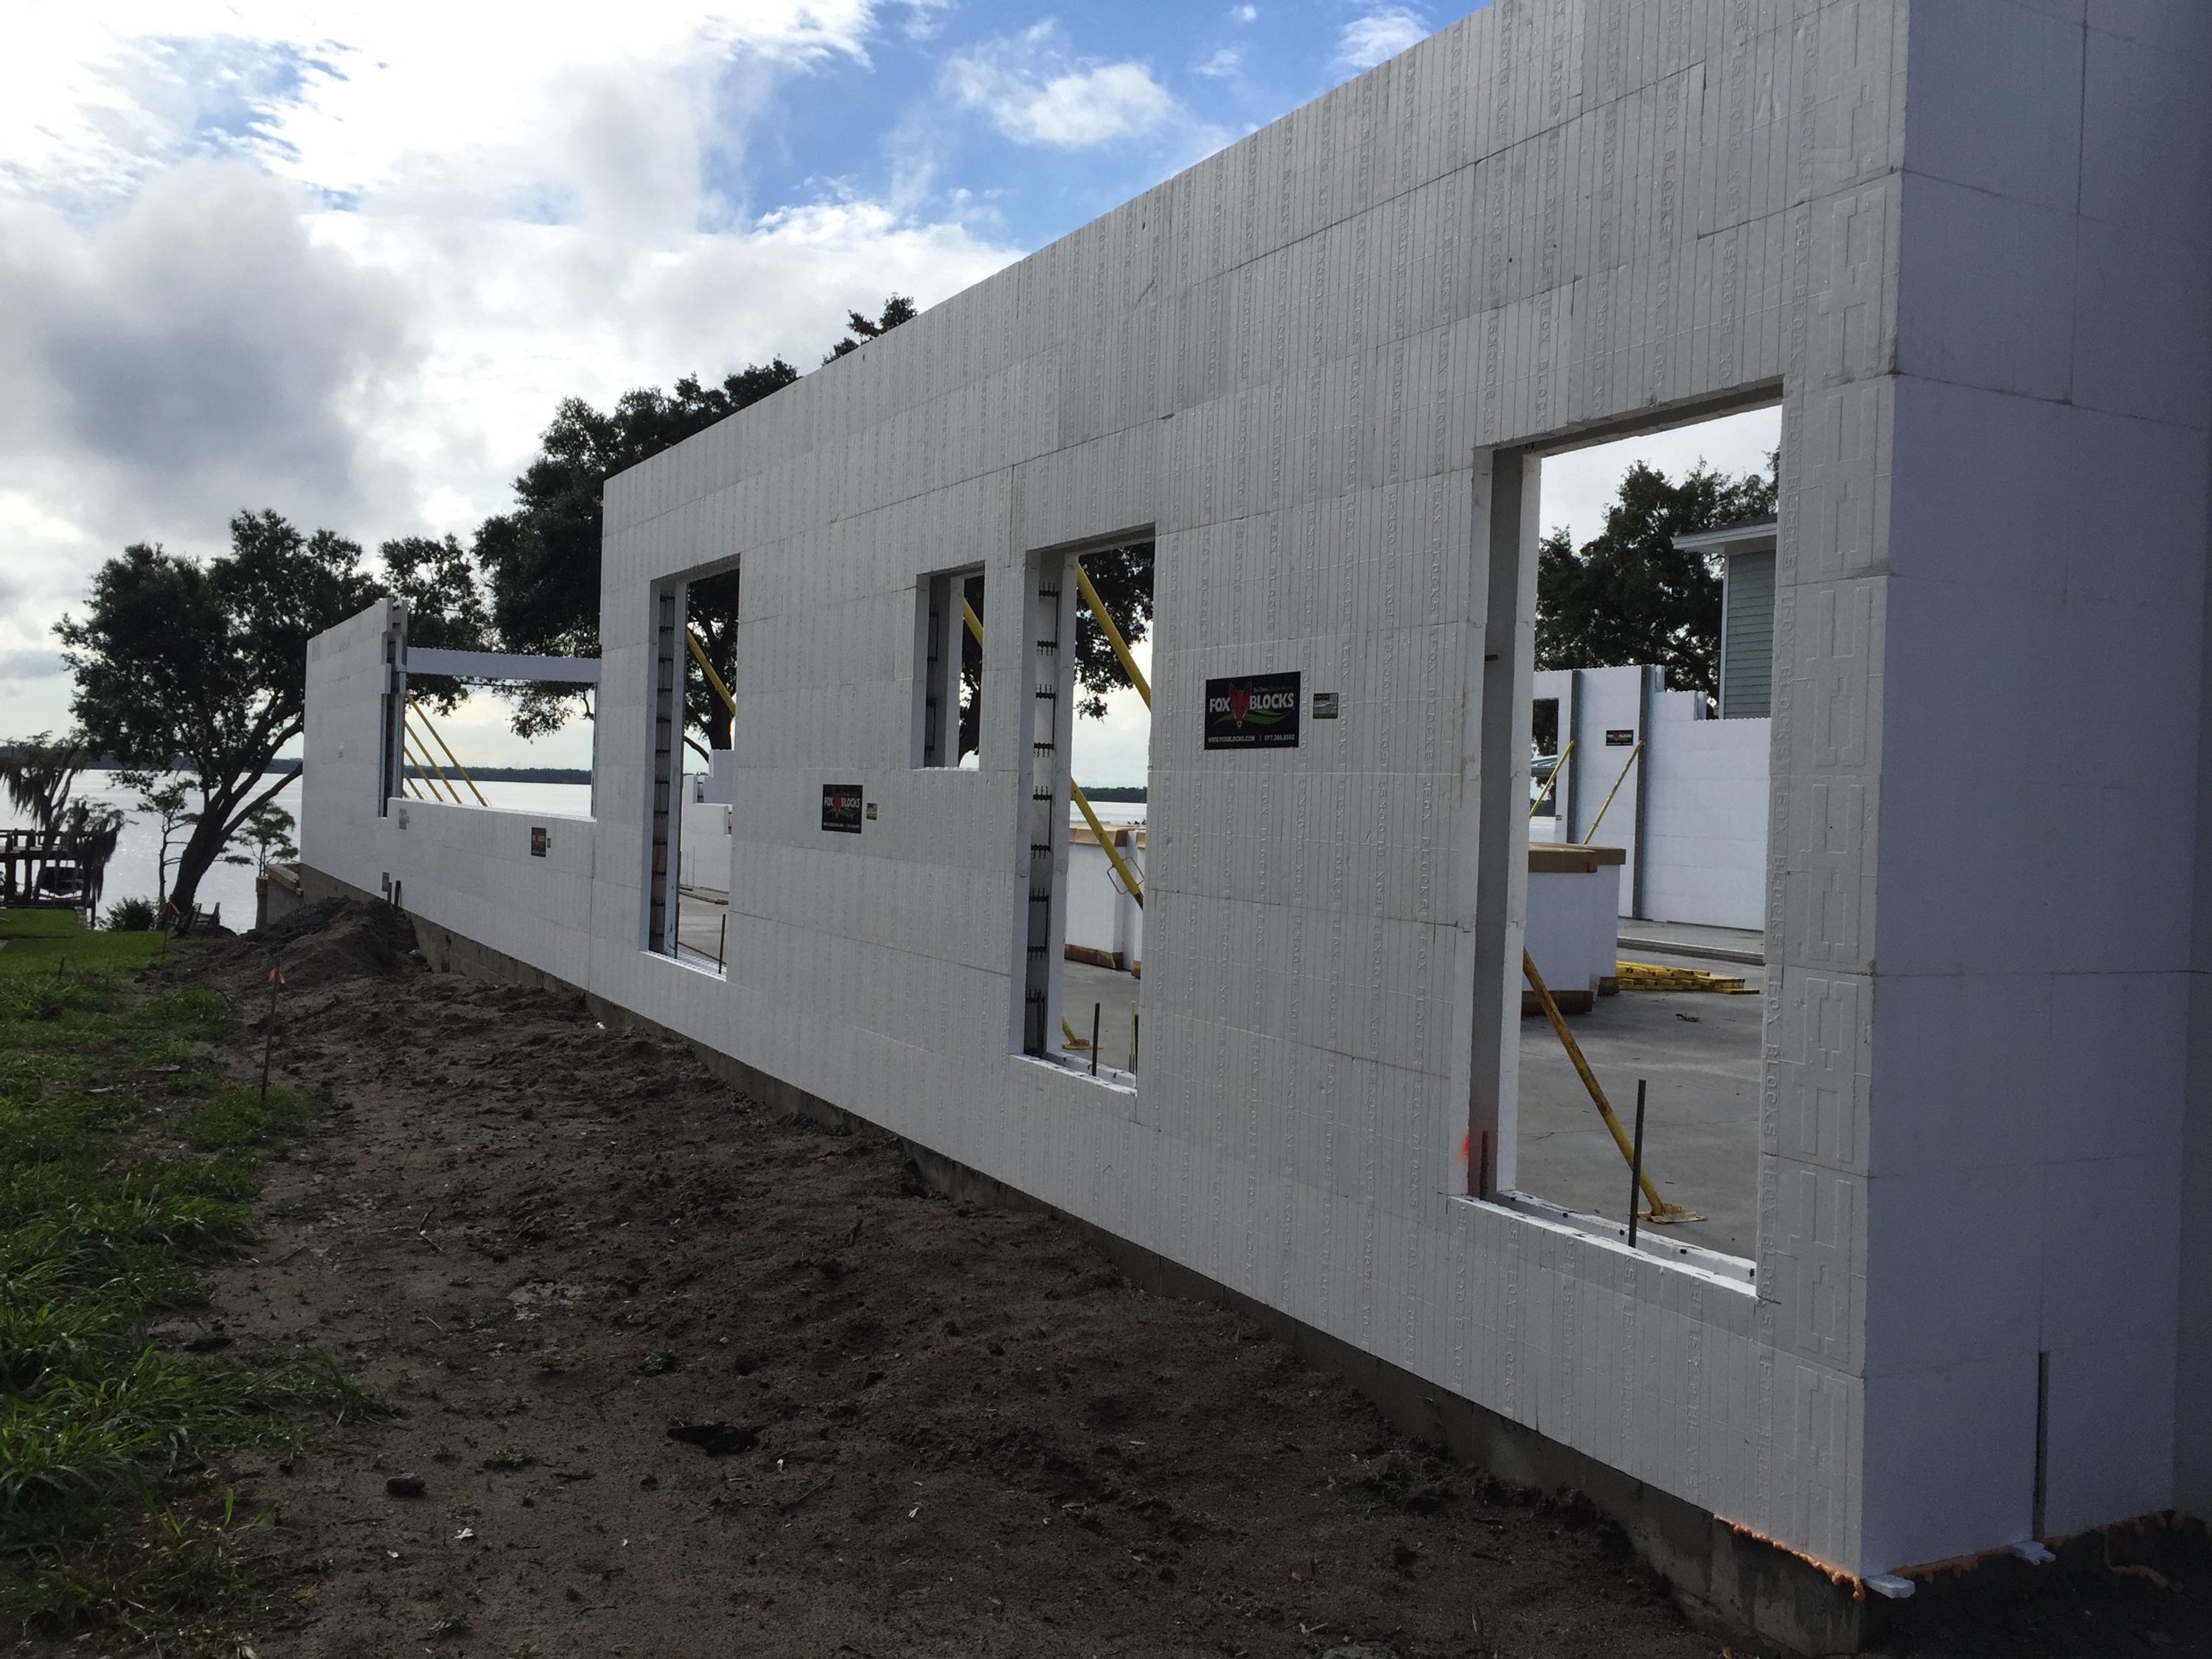 Turning Leaf Construction, a custom home builder and insulated concrete form distributor based in Sanford, Florida, has been building with ICFs for nearly 10 years. The company strongly recommends Floridians build ICF-fortified homes and businesses because they can withstand hurricane-force winds and are well insulated.